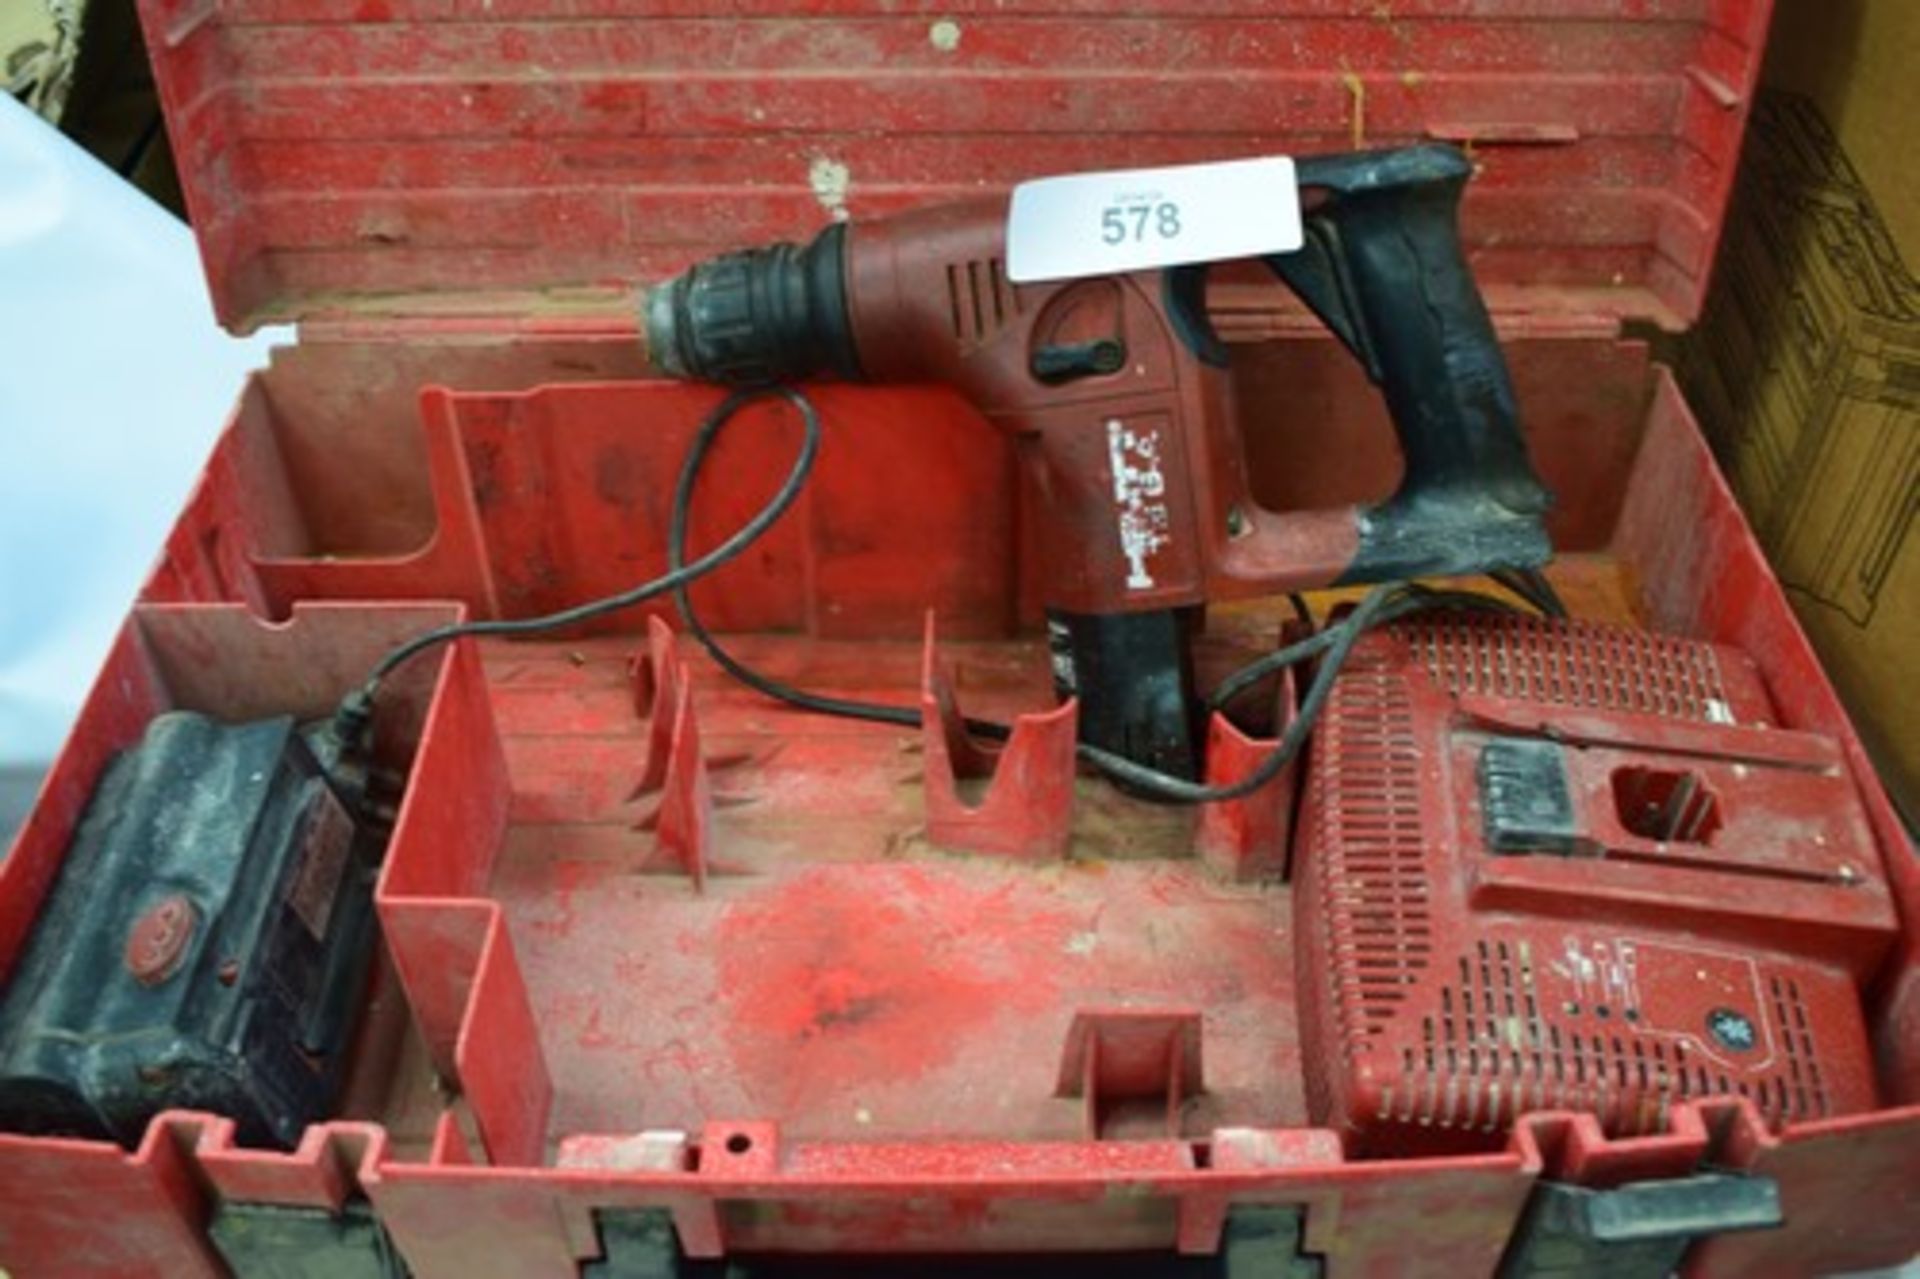 1 x Hilti cordless hammer drill, model: TE 6-A, 36v 12amp and charger - working and original red